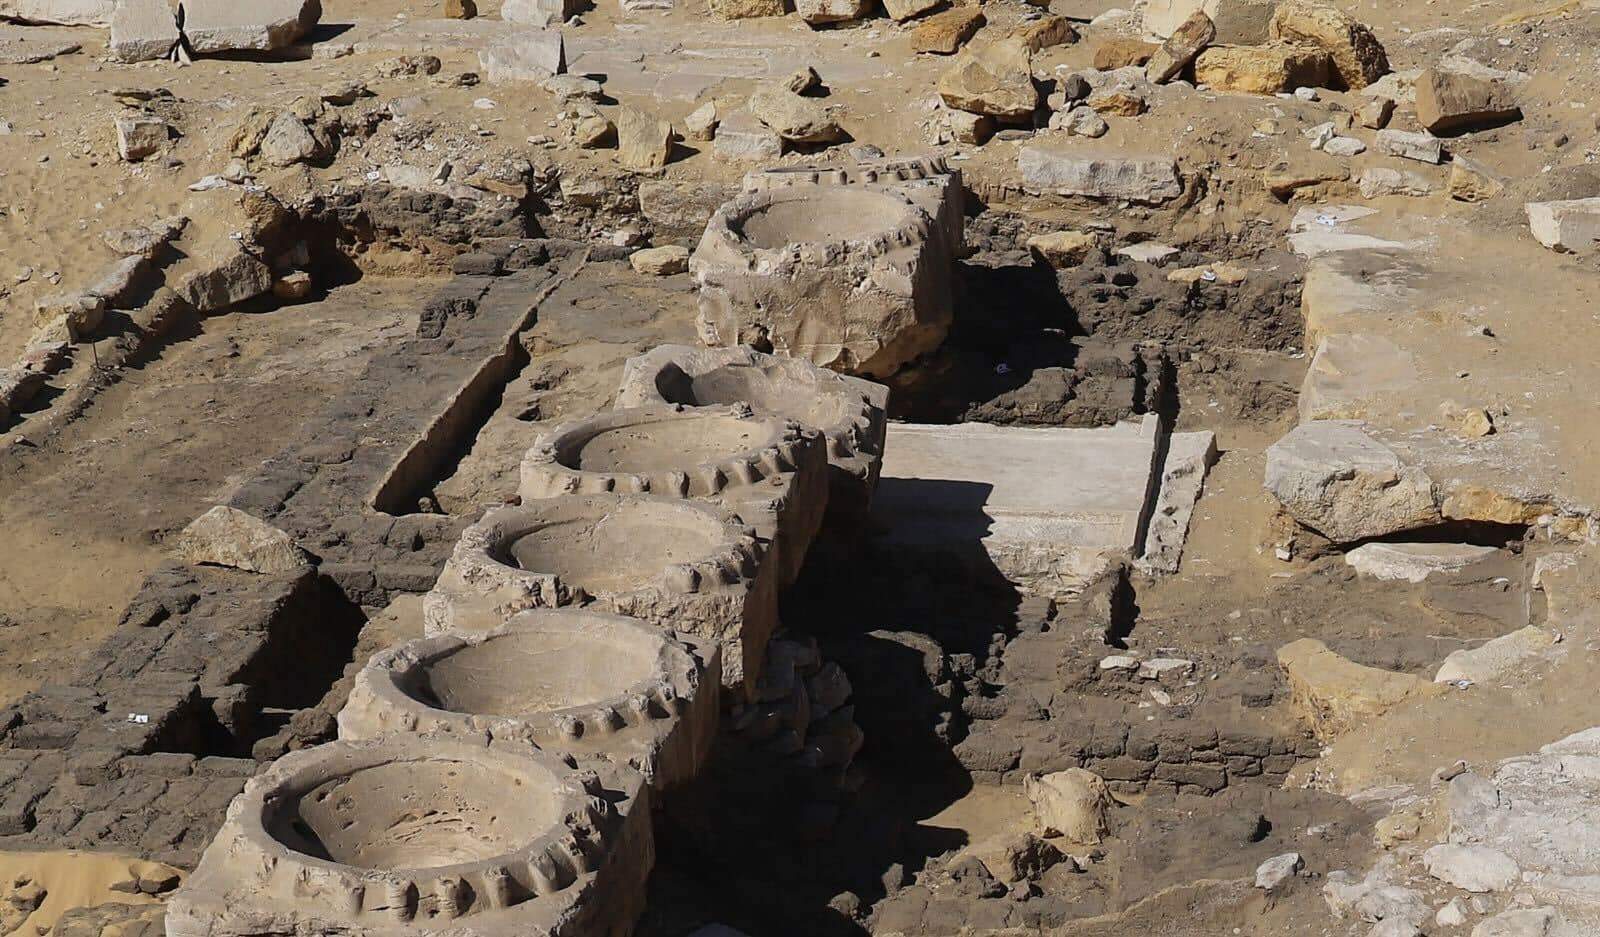 Egypt, remains of a building unearthed. Possibly one of the solar temples of the 5th Dynasty 